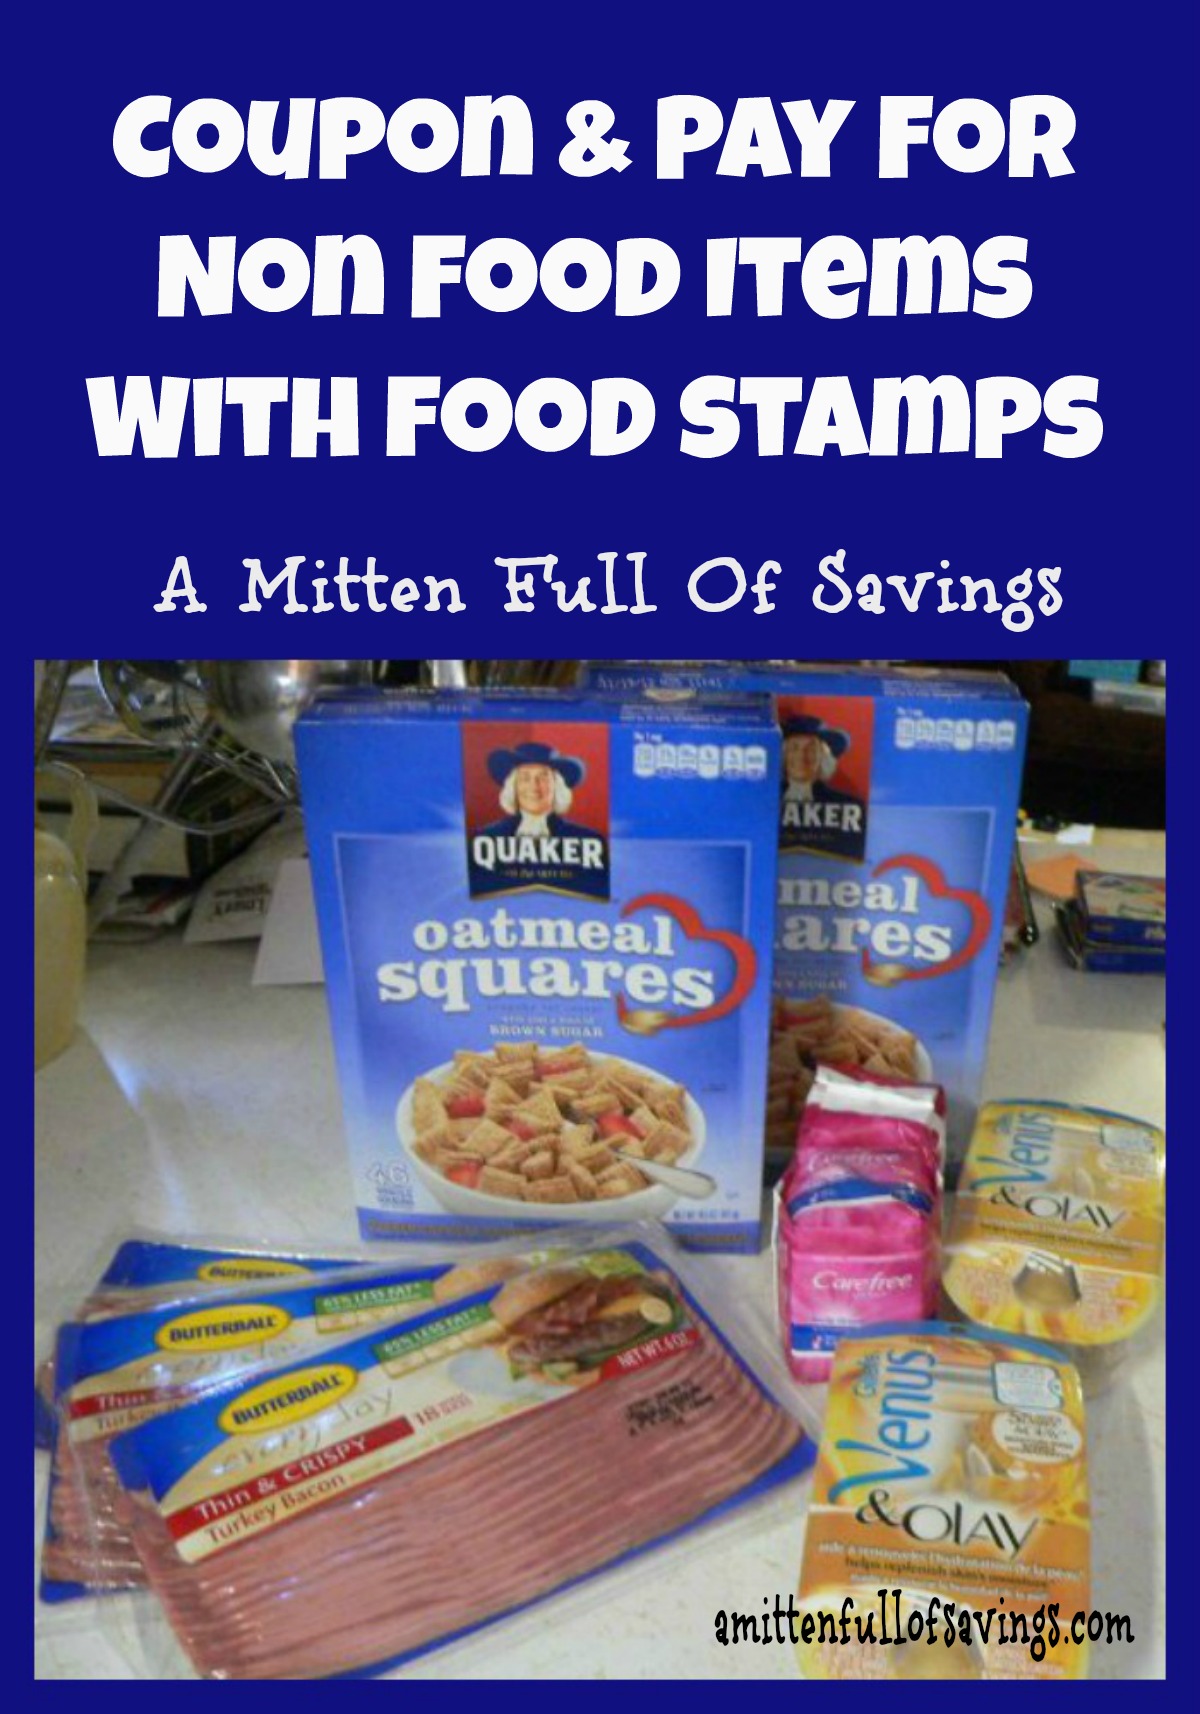 Coupon & Pay For Non Food Items With Food Stamps